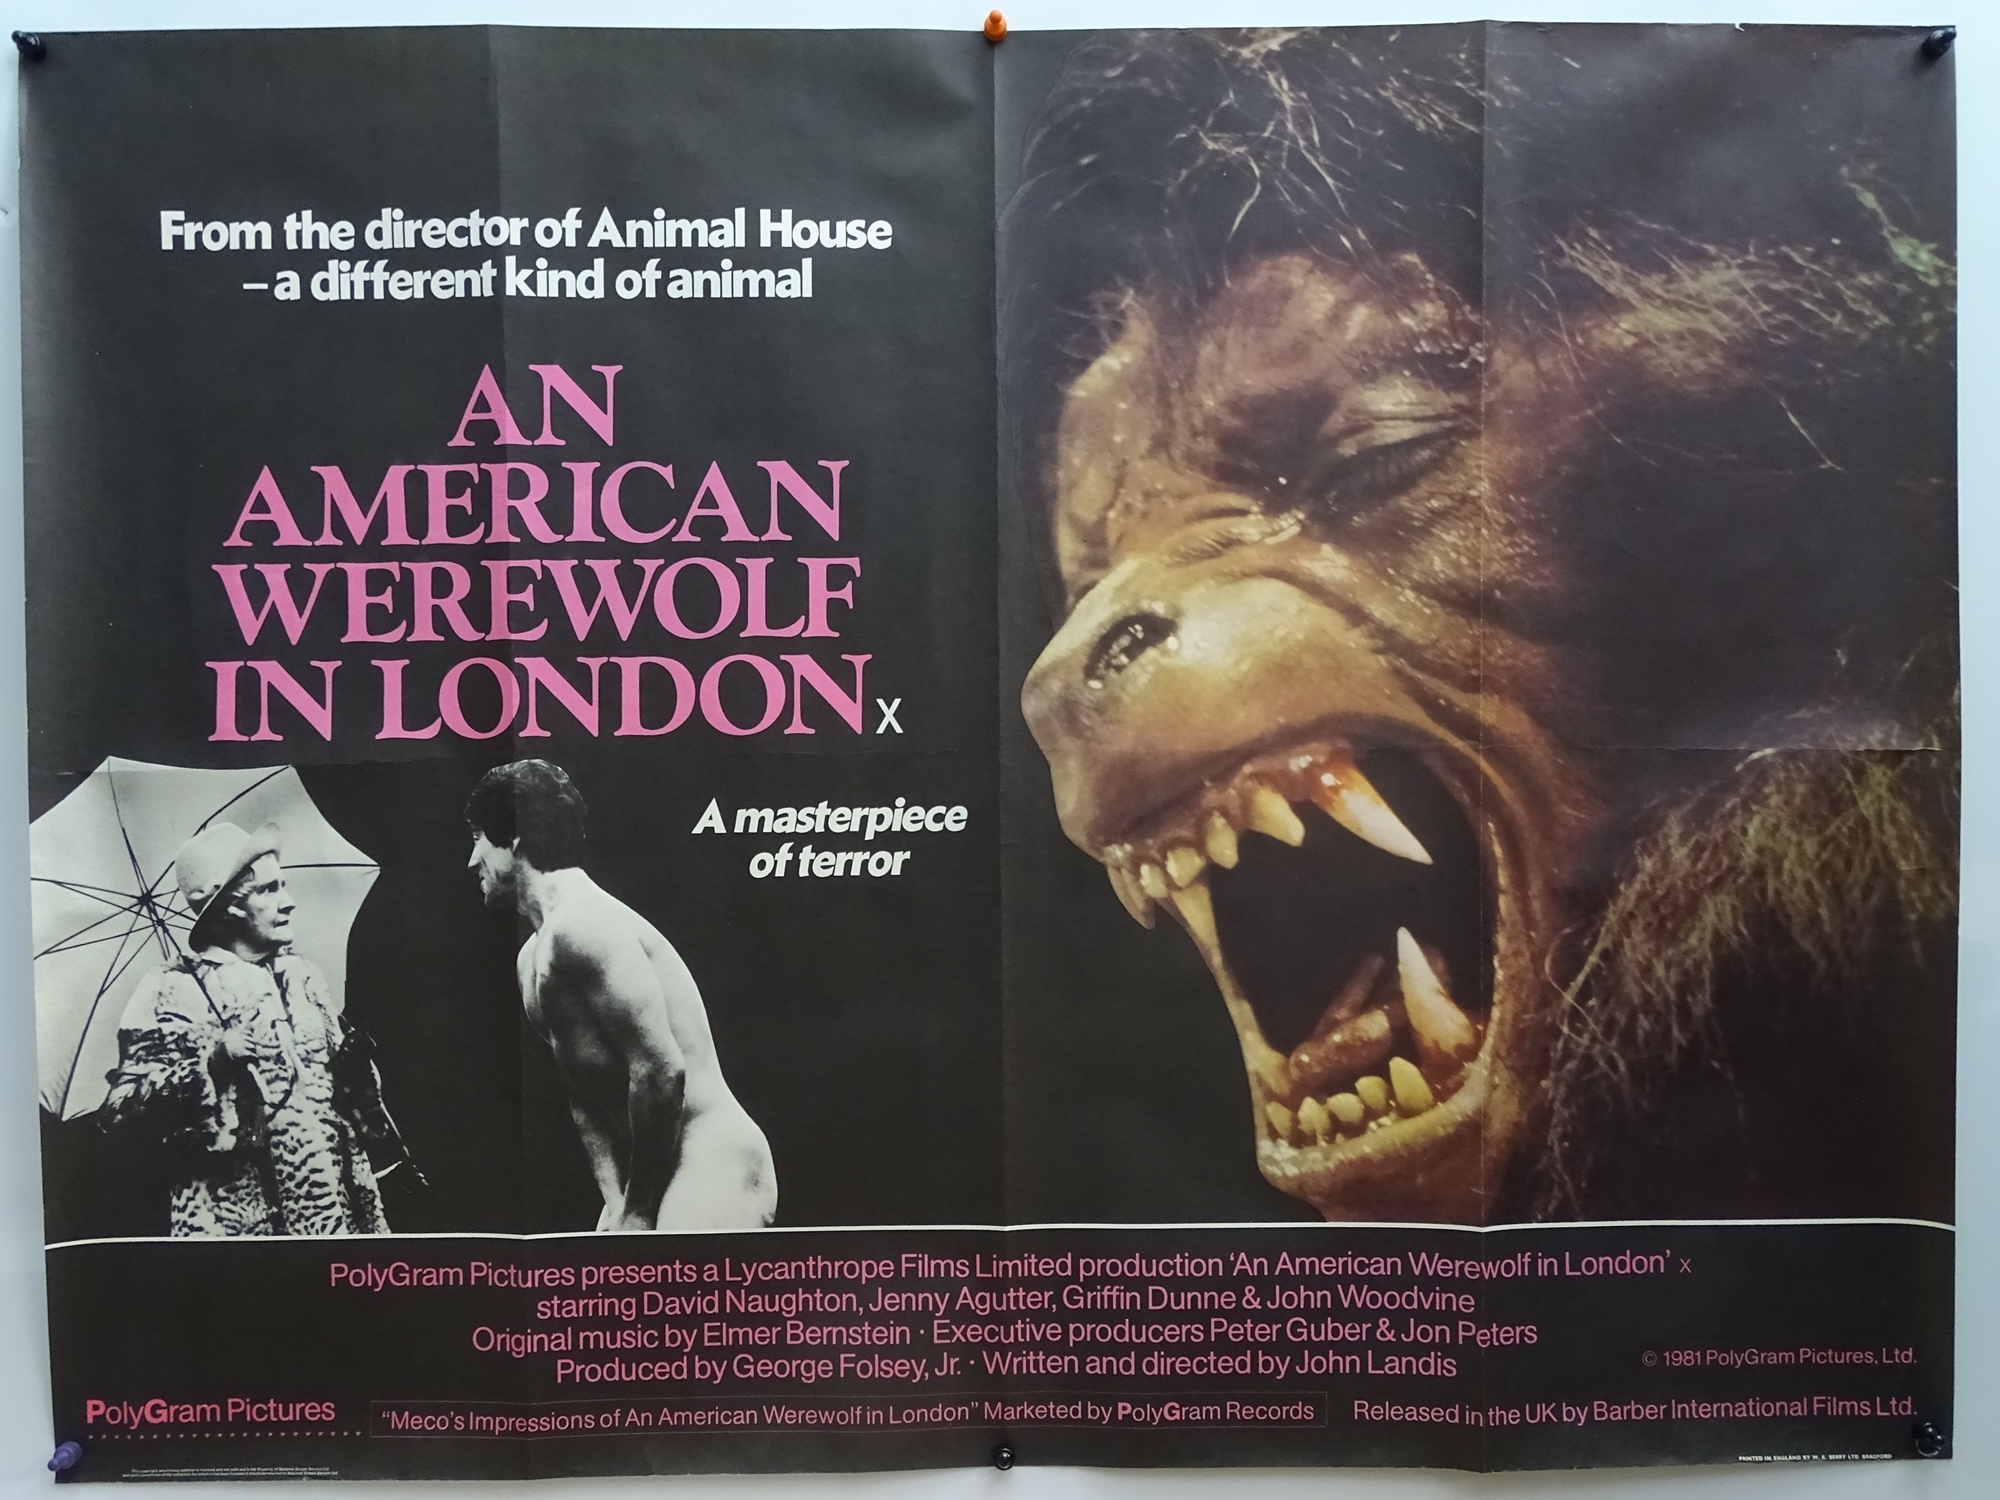 AN AMERICAN WEREWOLF IN LONDON (1981) - UK Quad Film Poster (arrived rolled, originally folded)